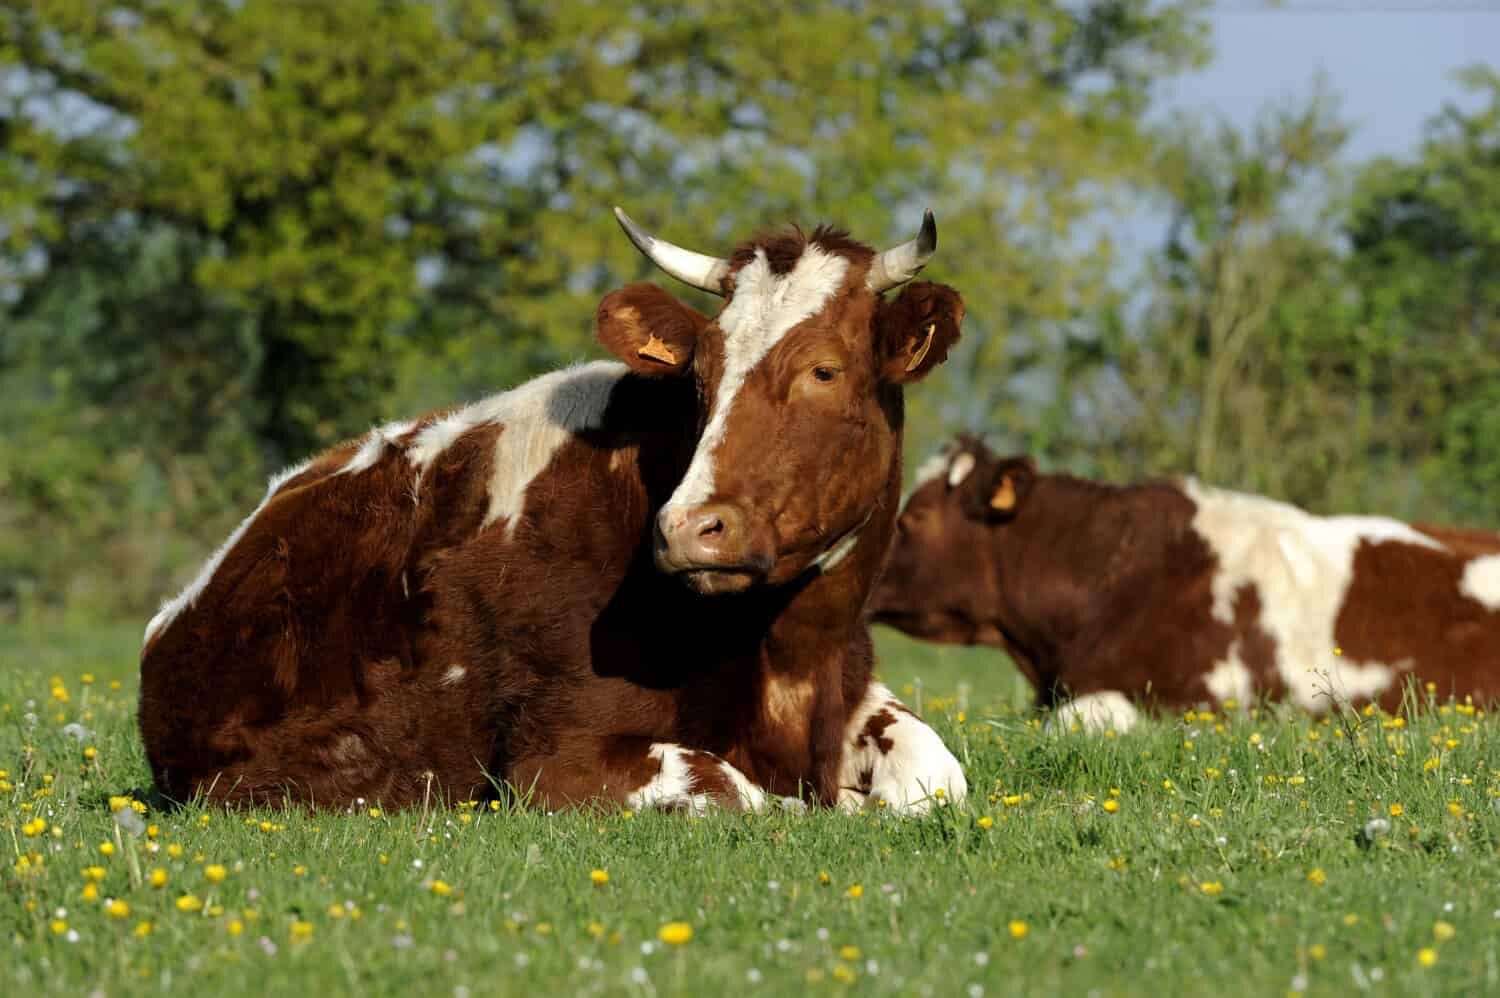 Maine-Anjou cows are sturdy and dependable cows that raise a good profit.